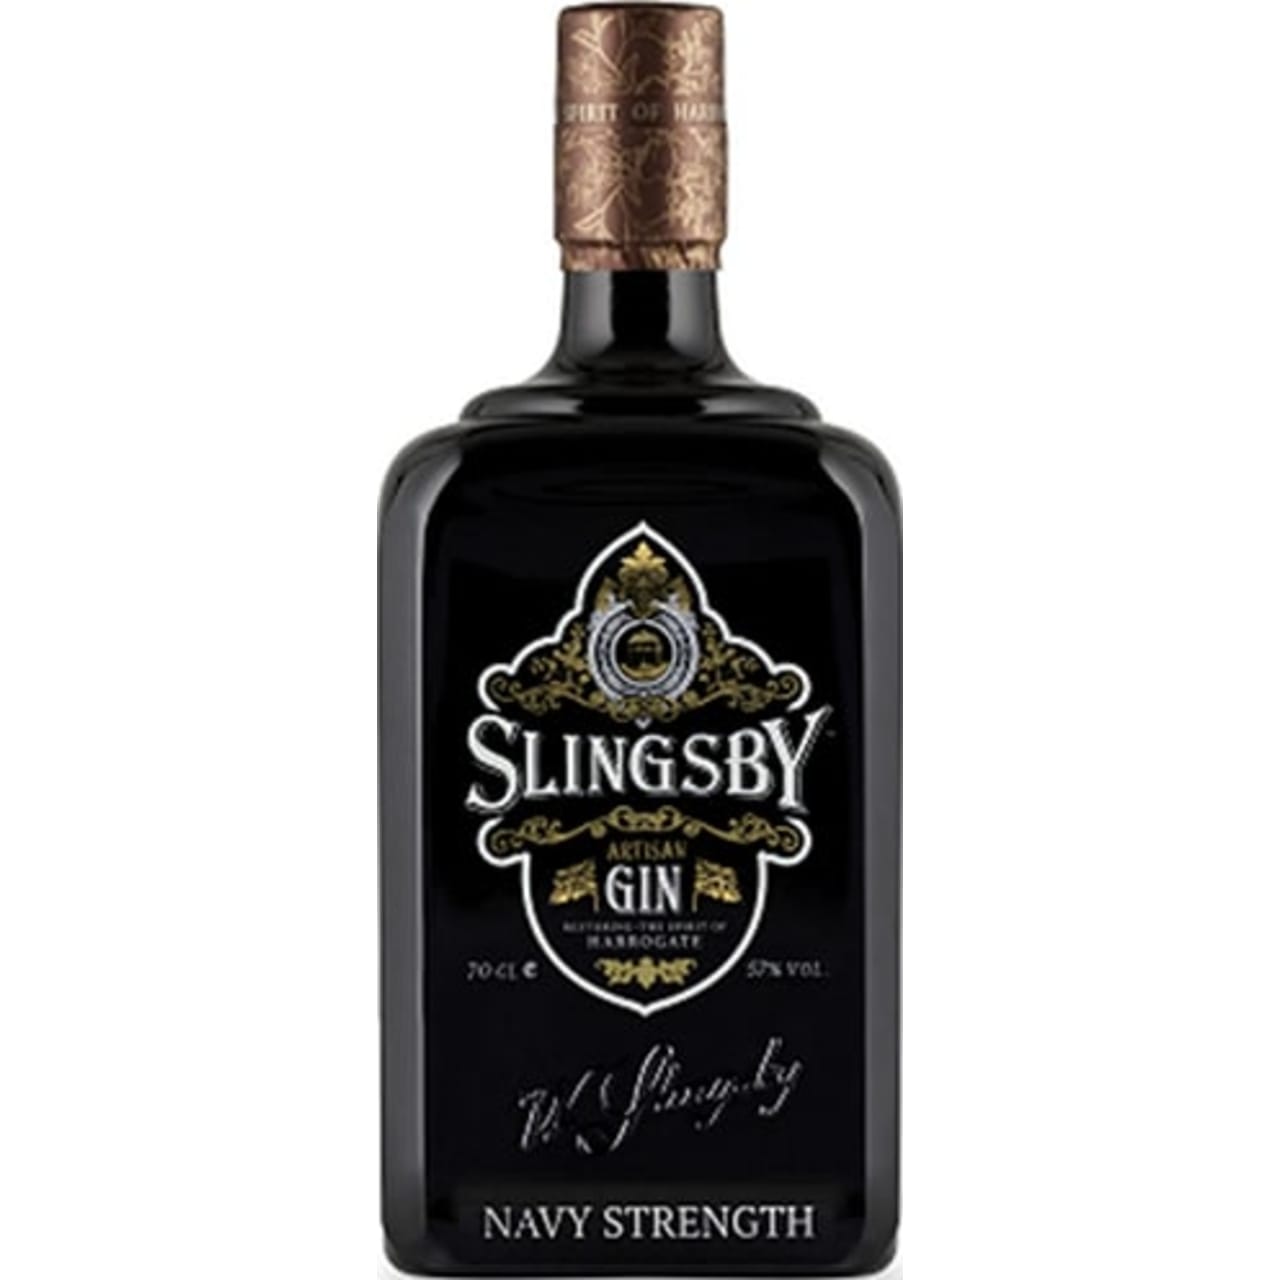 A navy strength variation of the smashing Slingsby Gin. At 57% ABV, the nose is expectedly spirity, though this is met by an unexpected cream sweetness and bold, bright grapefruits.